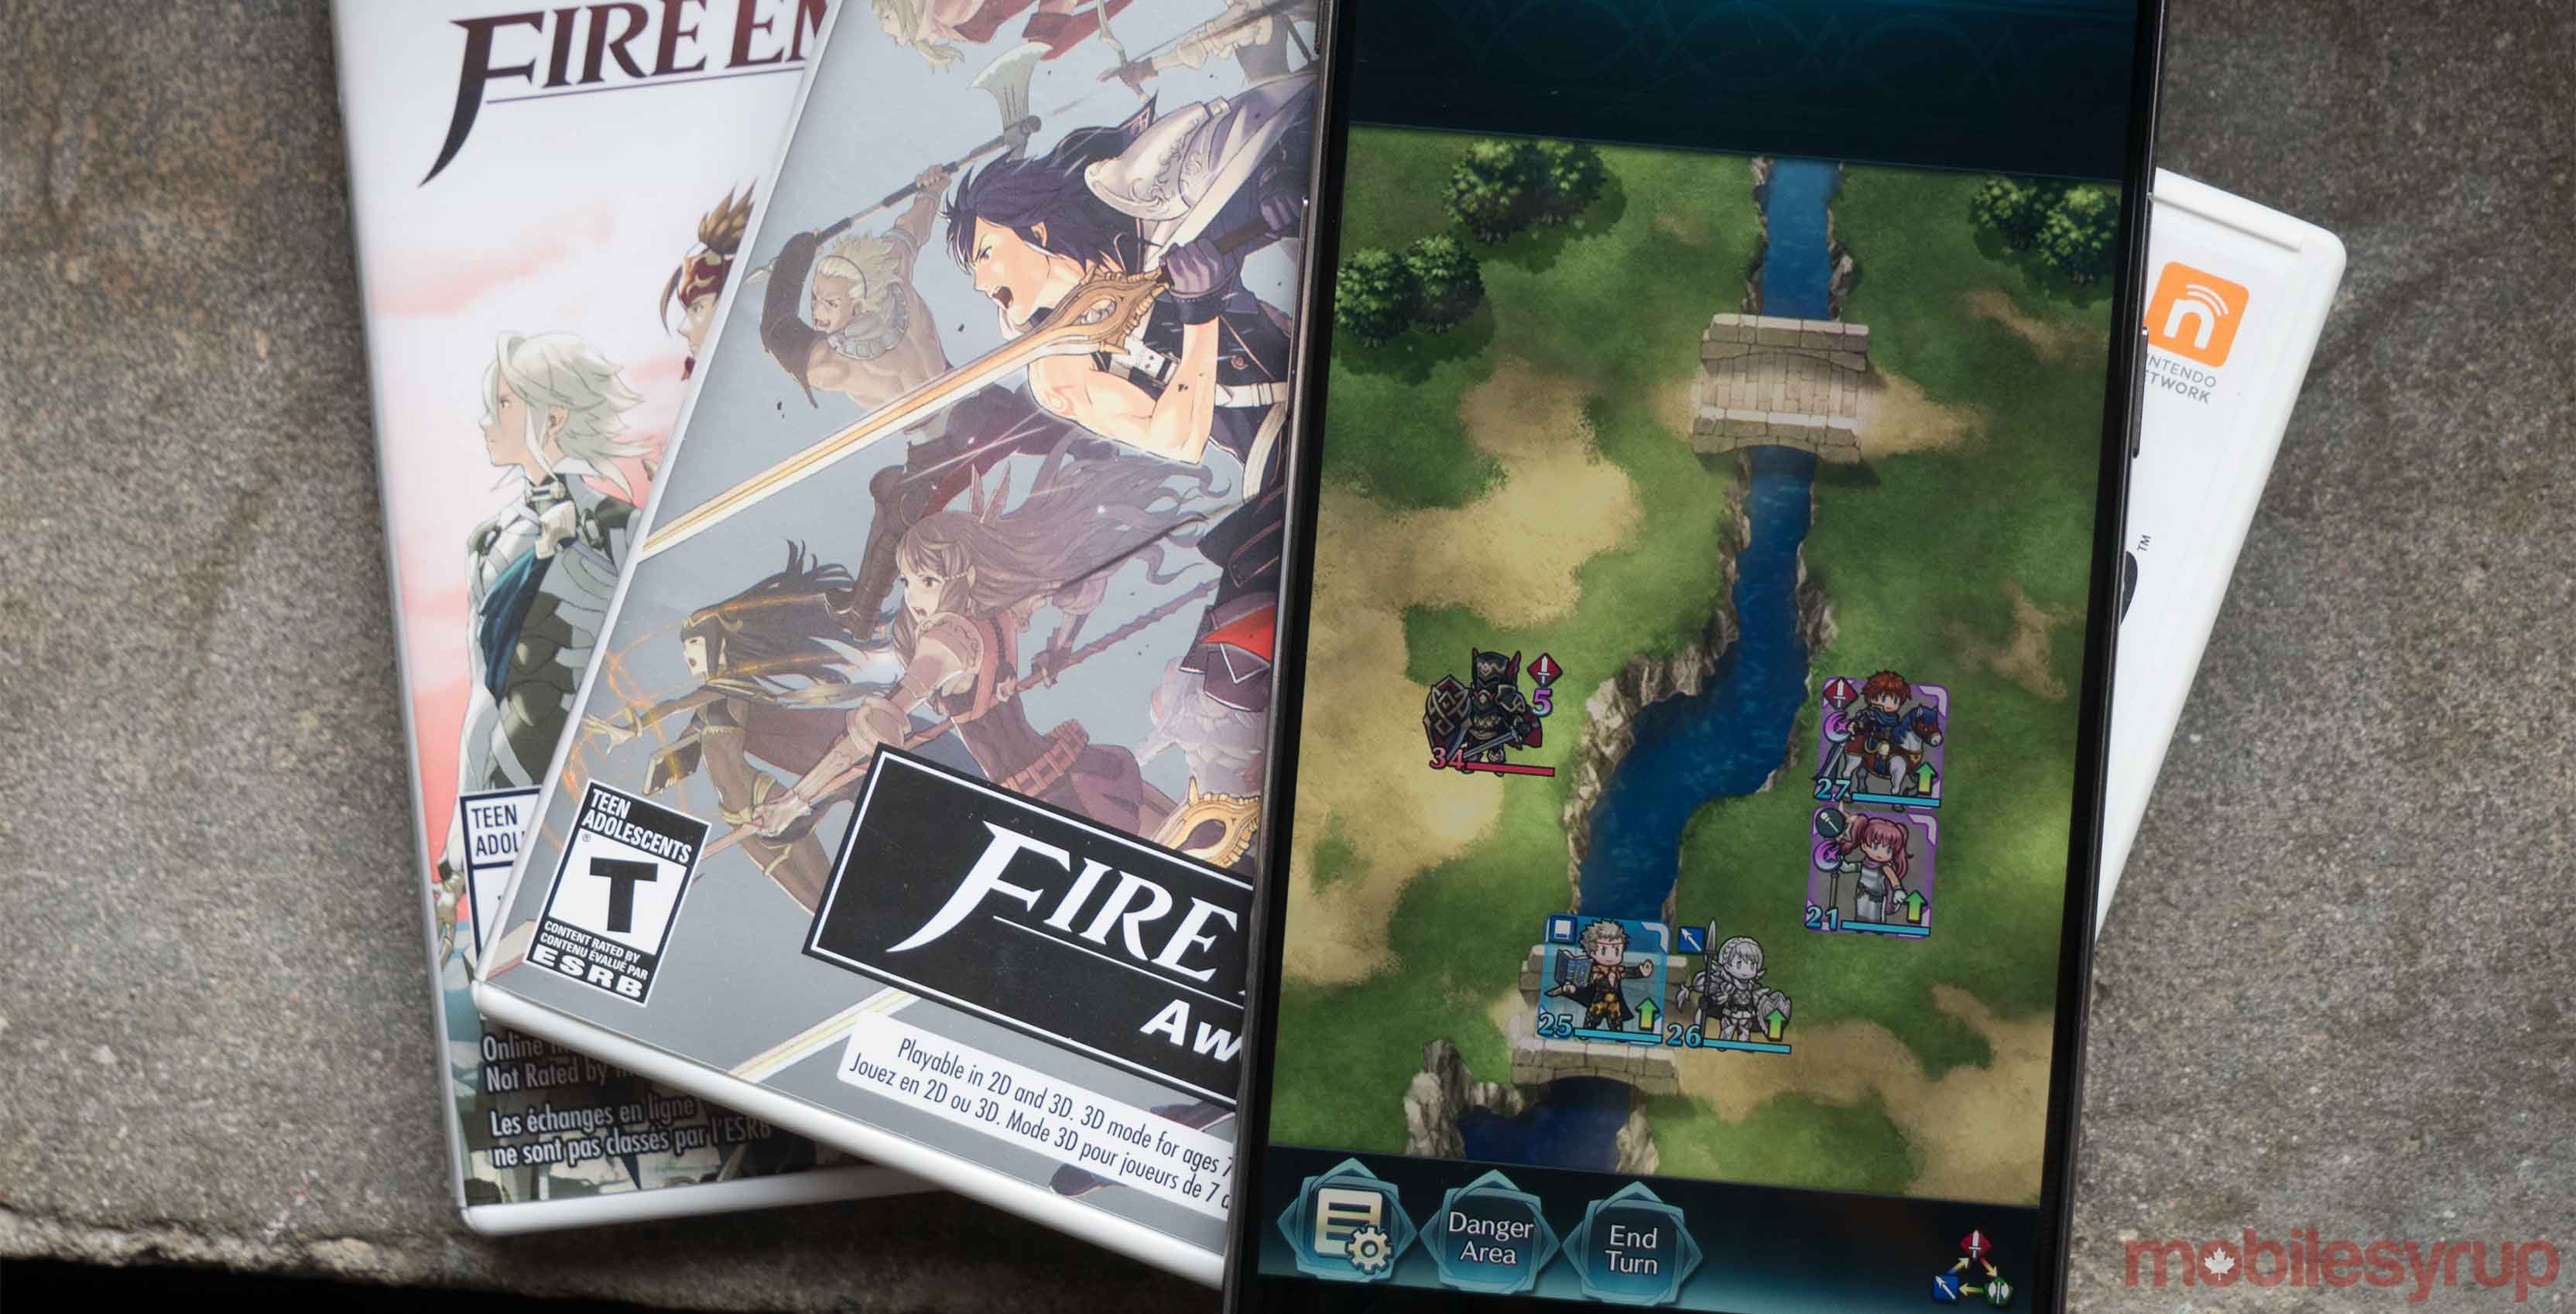 Fire Emblem Heroes playing on a phone that is laying on top of video game cases